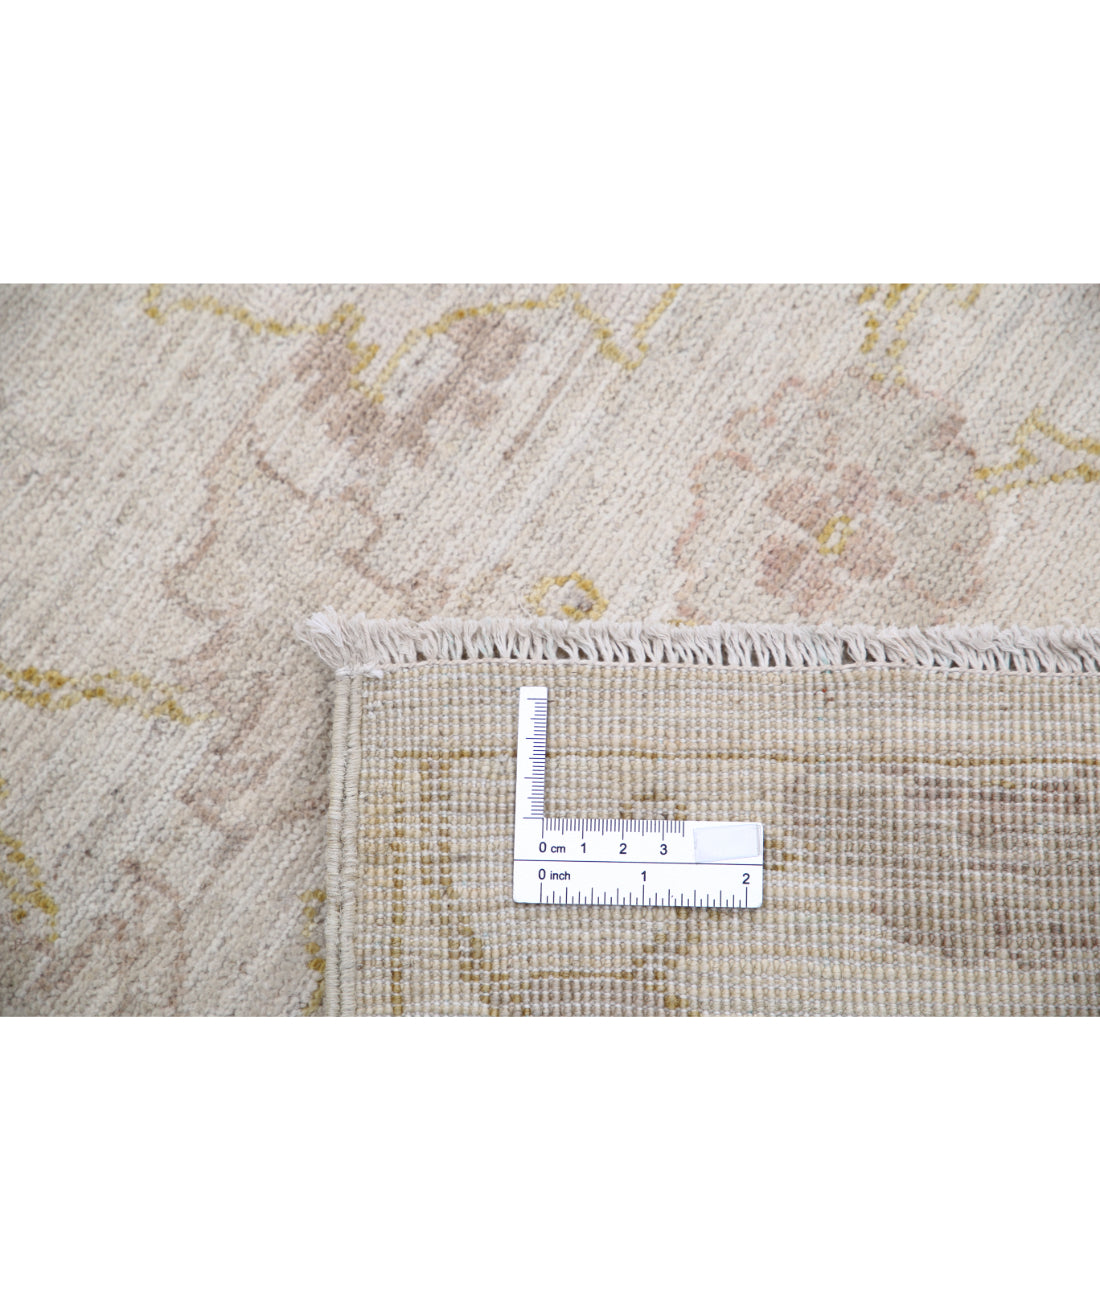 Hand Knotted Serenity Wool Rug - 6'1'' x 8'4'' 6'1'' x 8'4'' (183 X 250) / Ivory / Gold